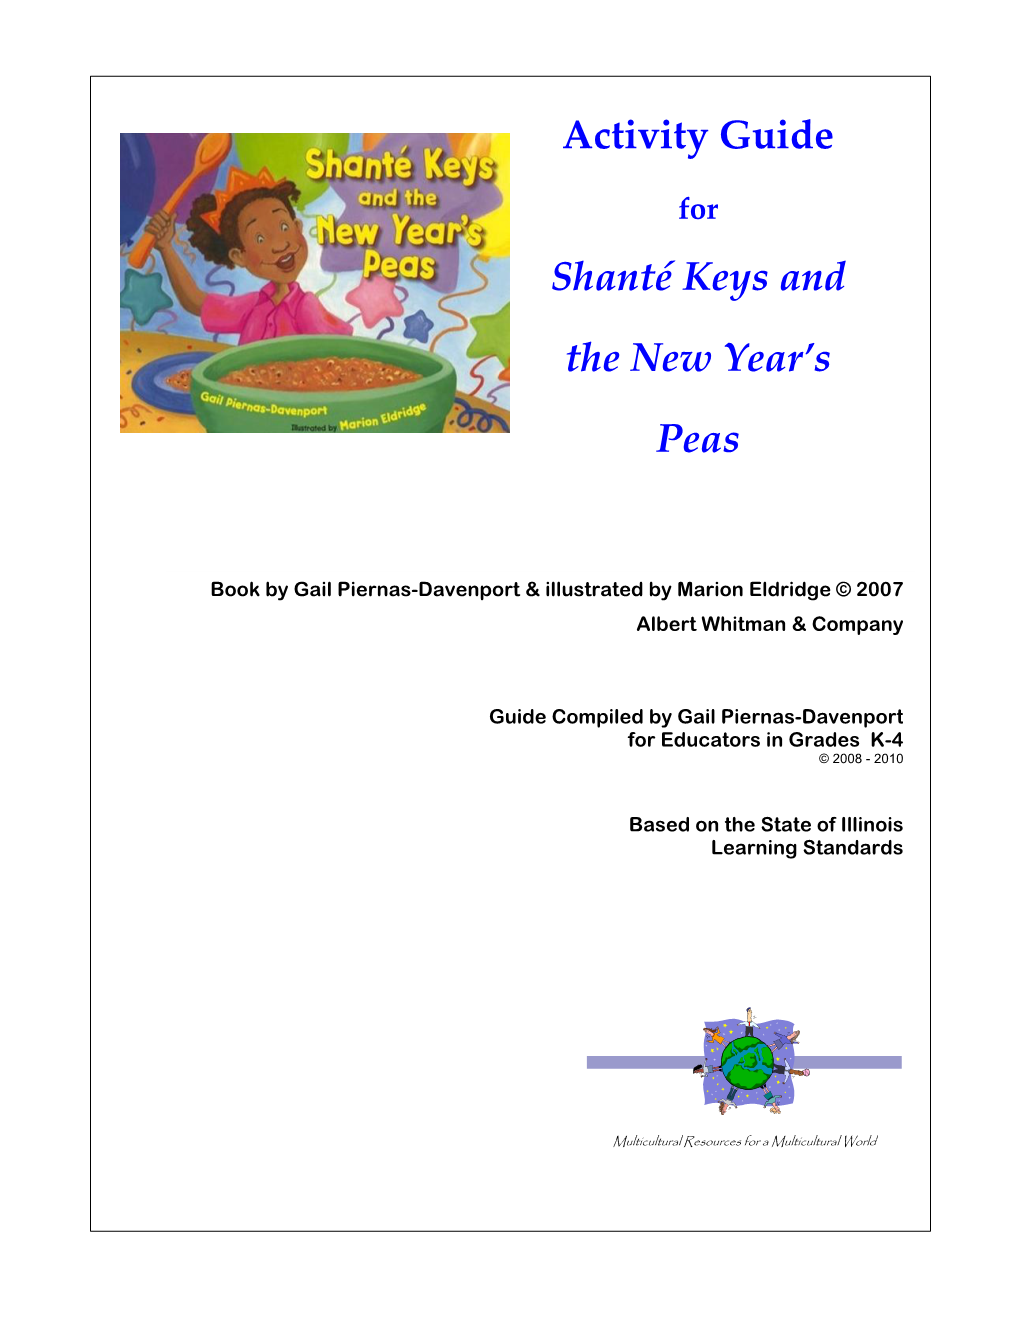 Shanté Keys and the New Year's Peas Activity Guide